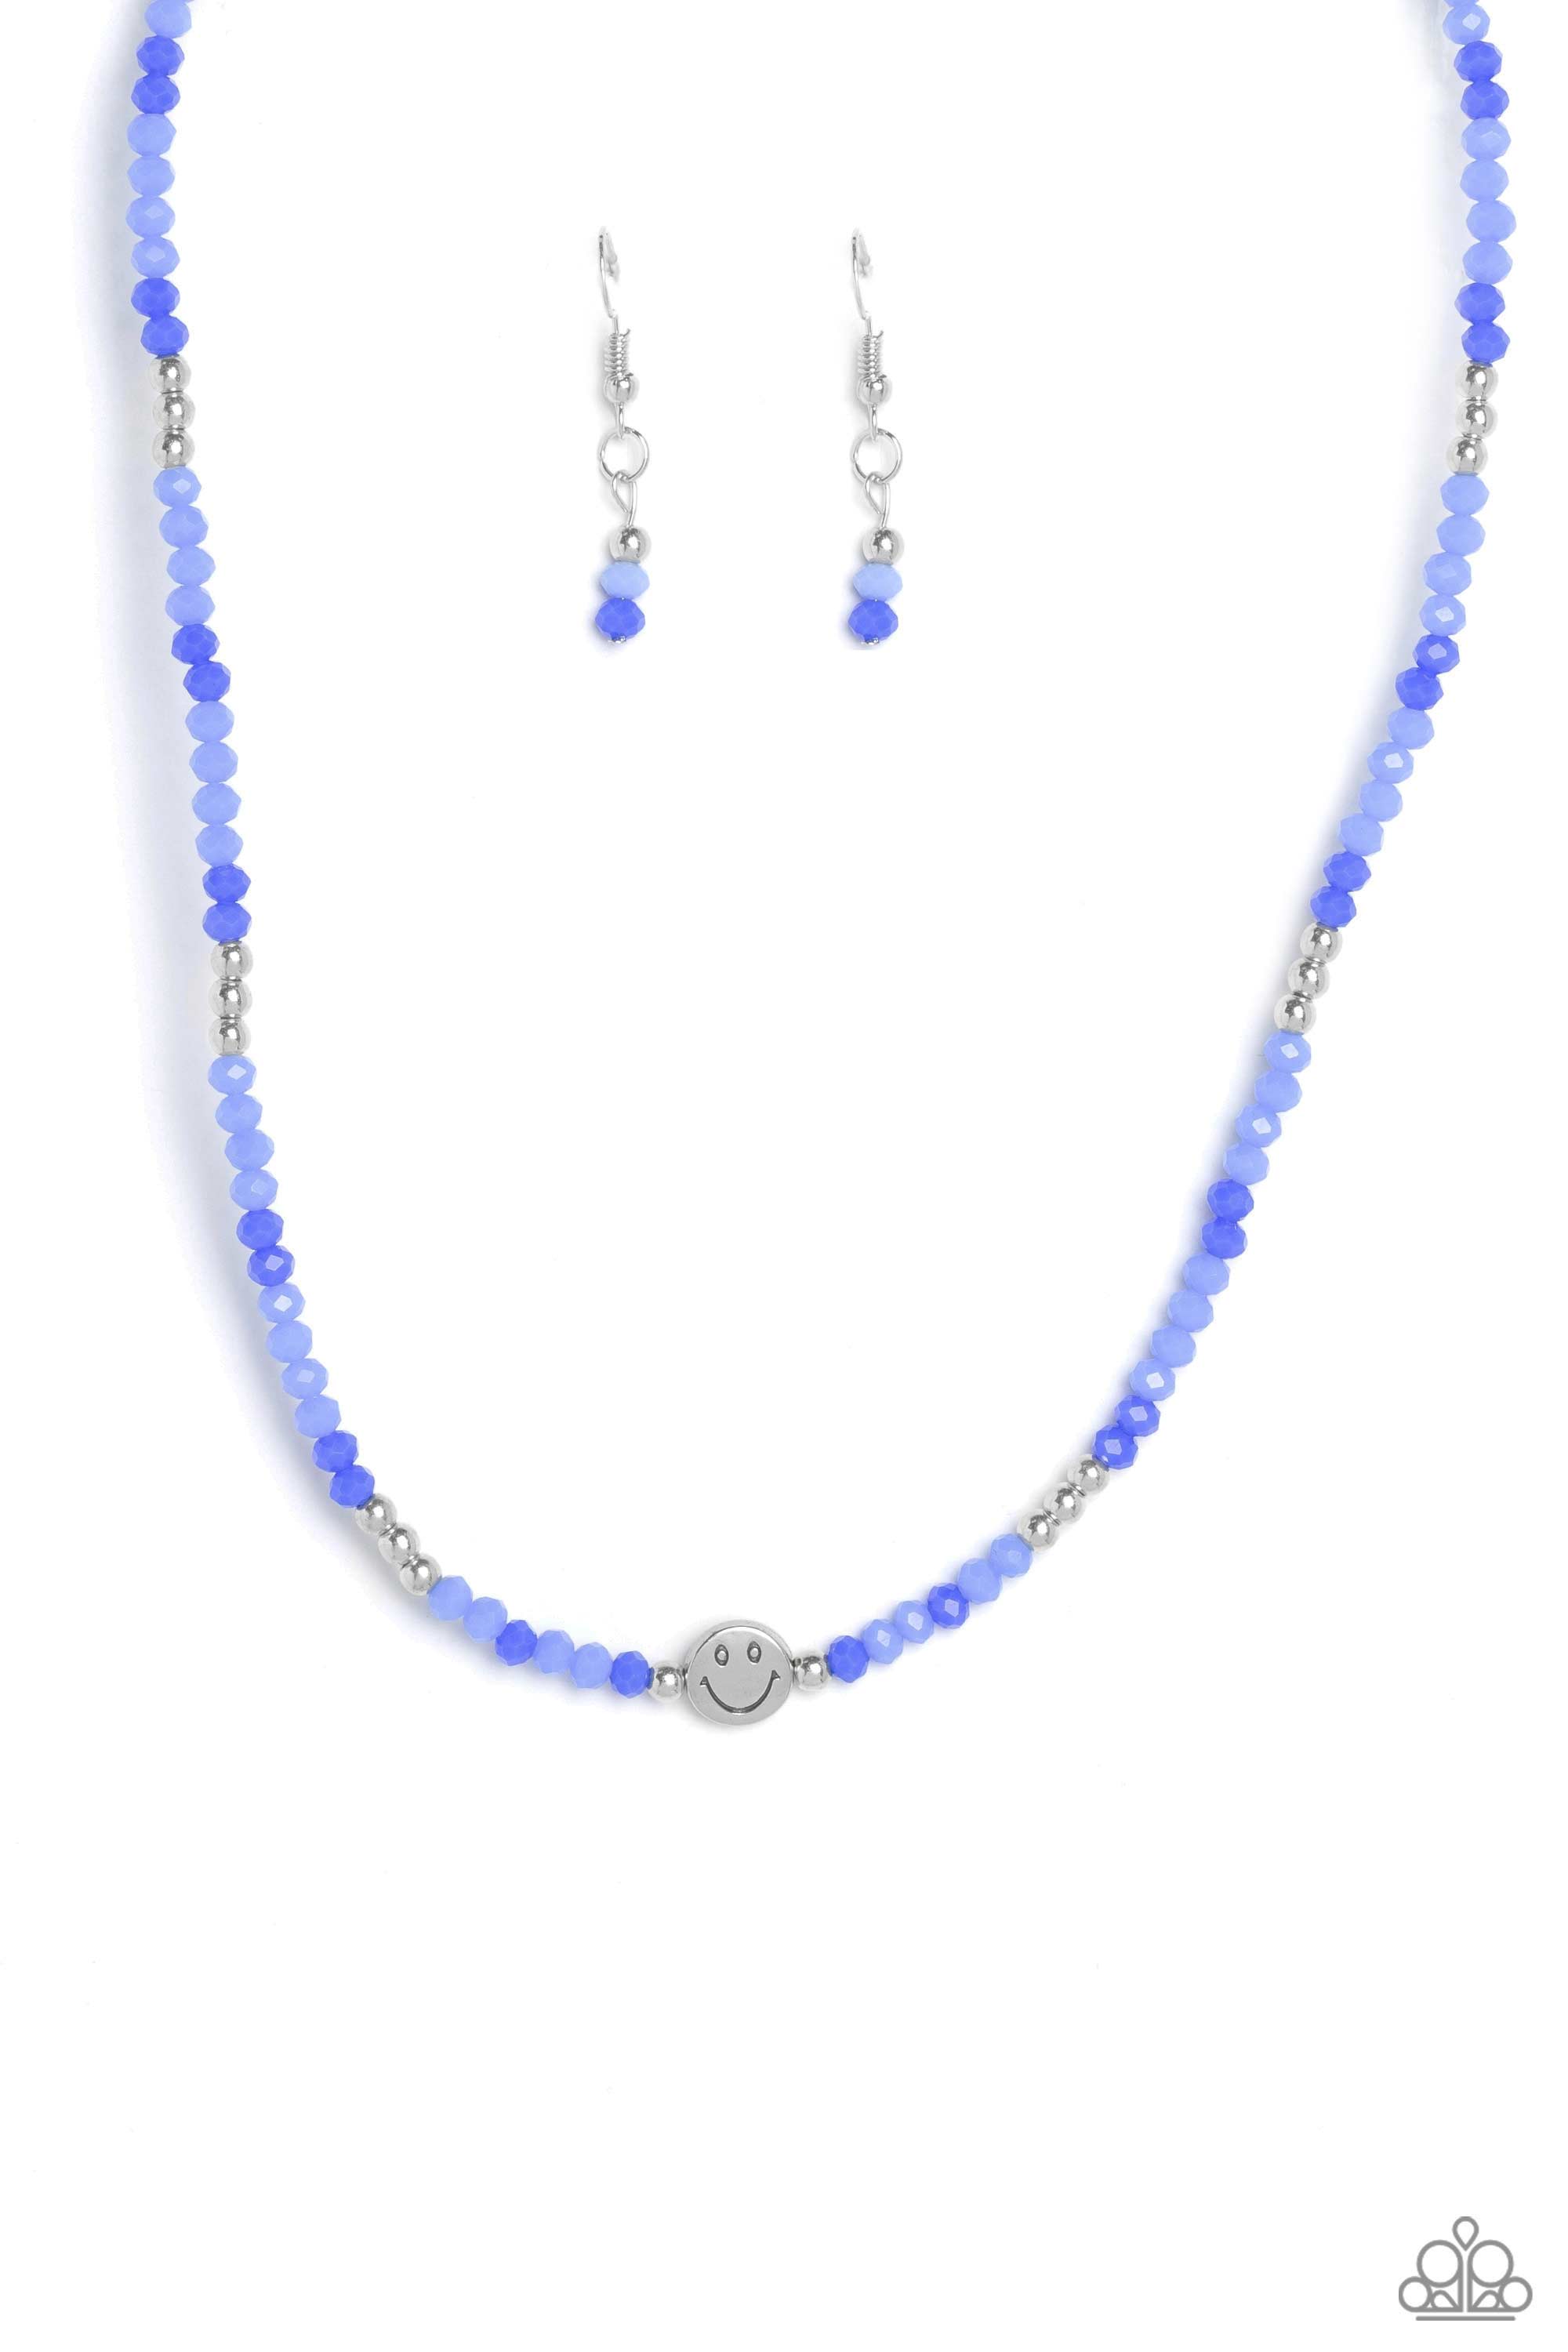 Beaming Bling Blue Necklace - Paparazzi Accessories- lightbox - CarasShop.com - $5 Jewelry by Cara Jewels